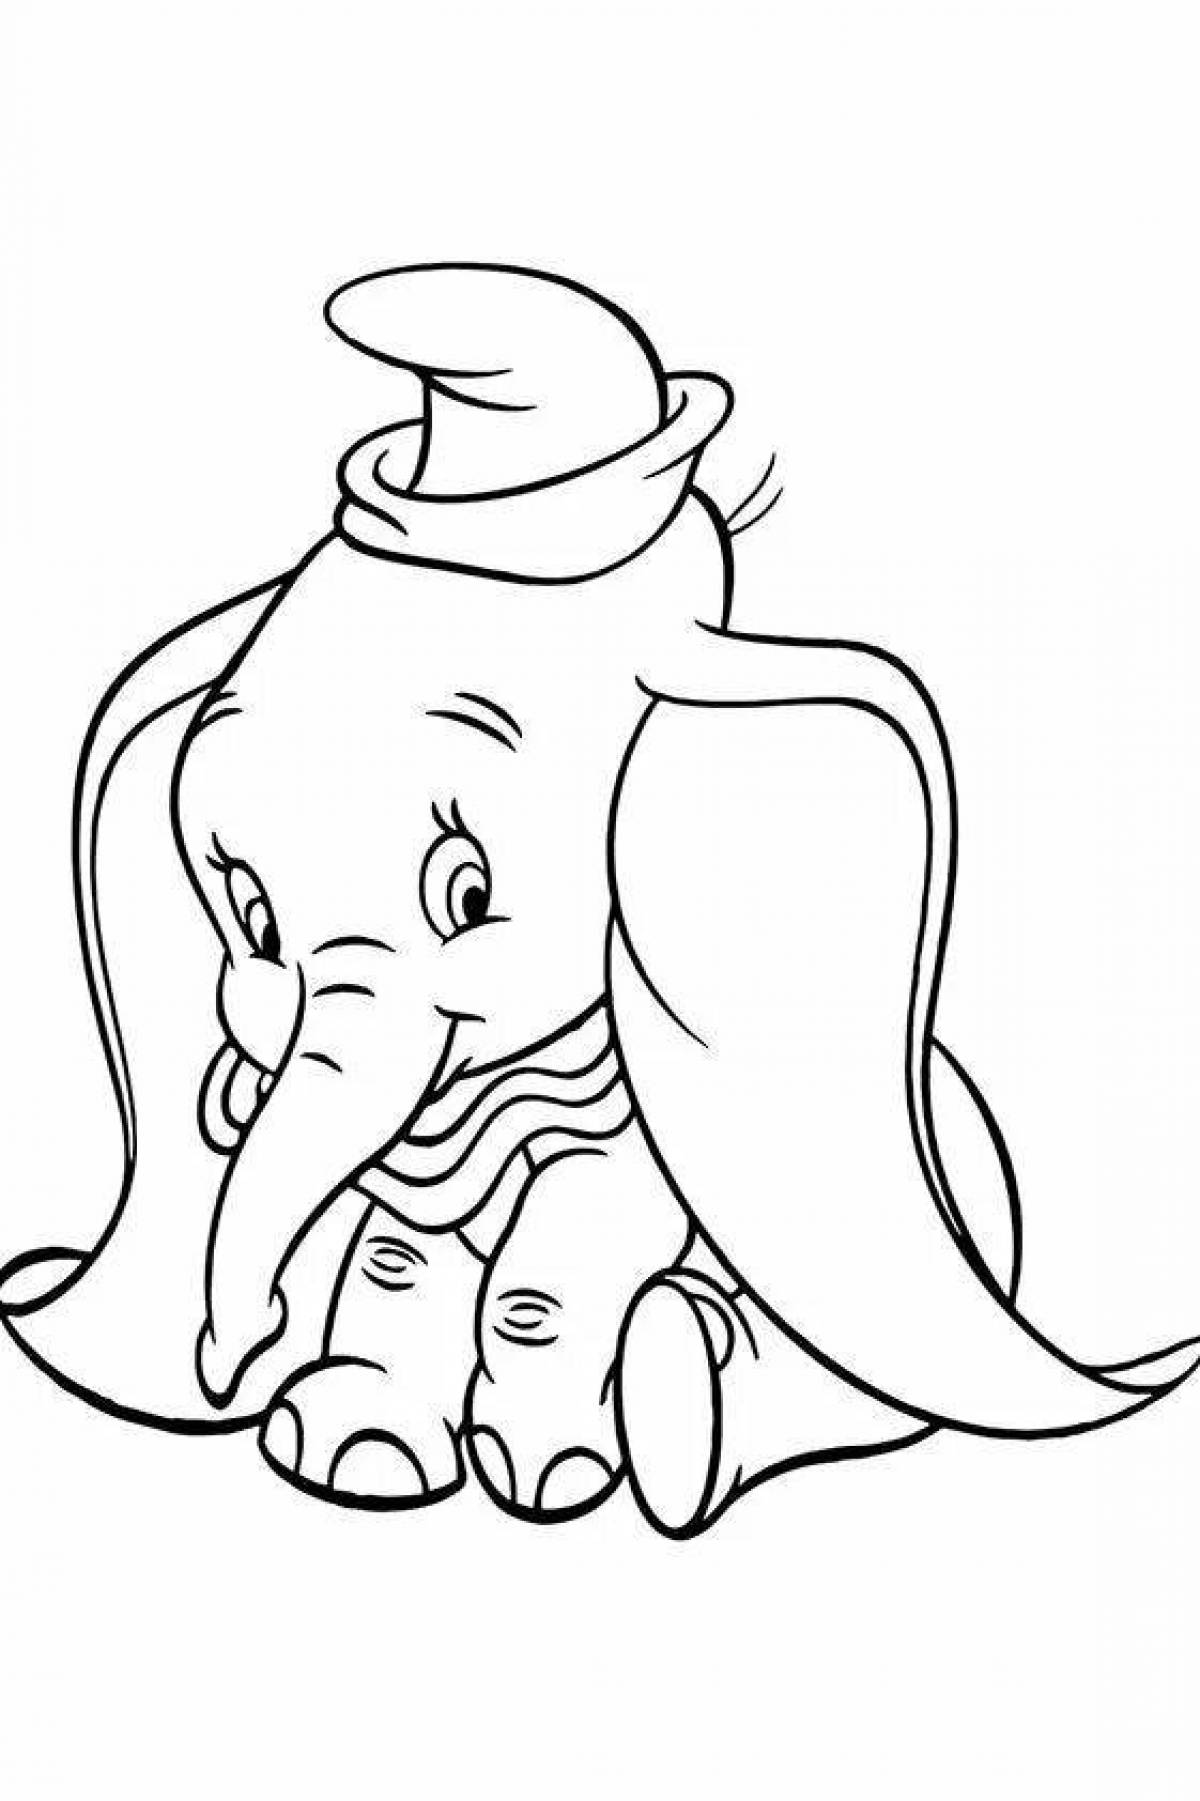 Colorful jumbo coloring page